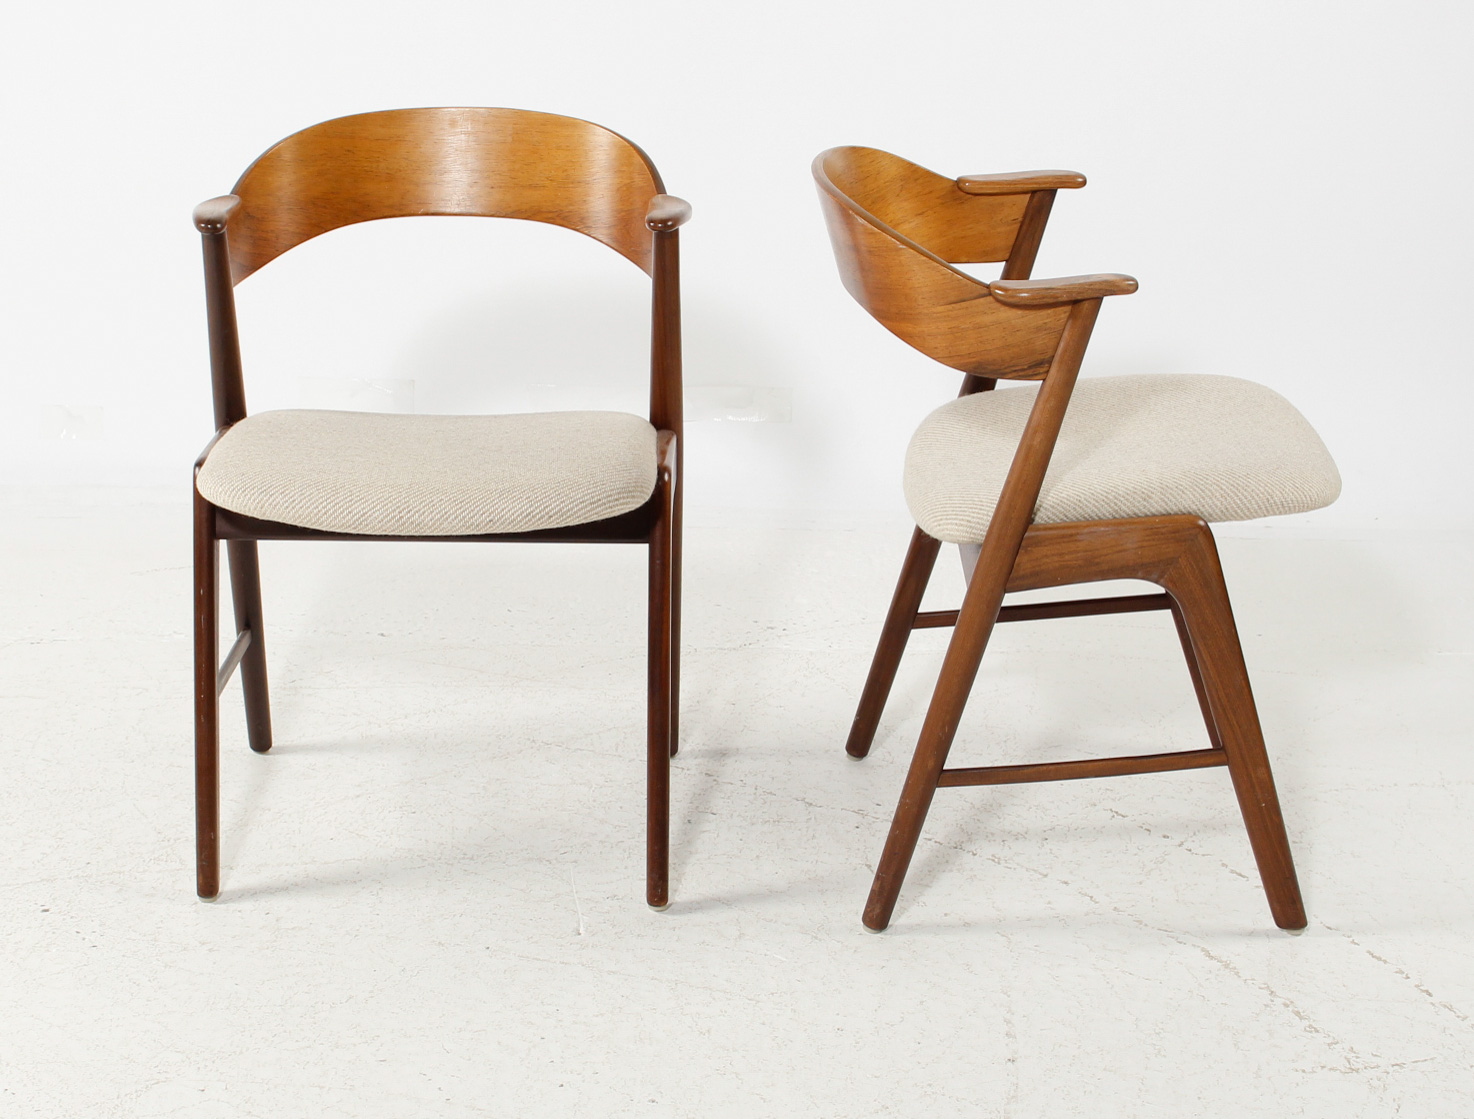 Kai Kristiansen. A set of six chairs in rosewood/mahogany (6) This lot has been put up for resale under lot no. | Lauritz.com